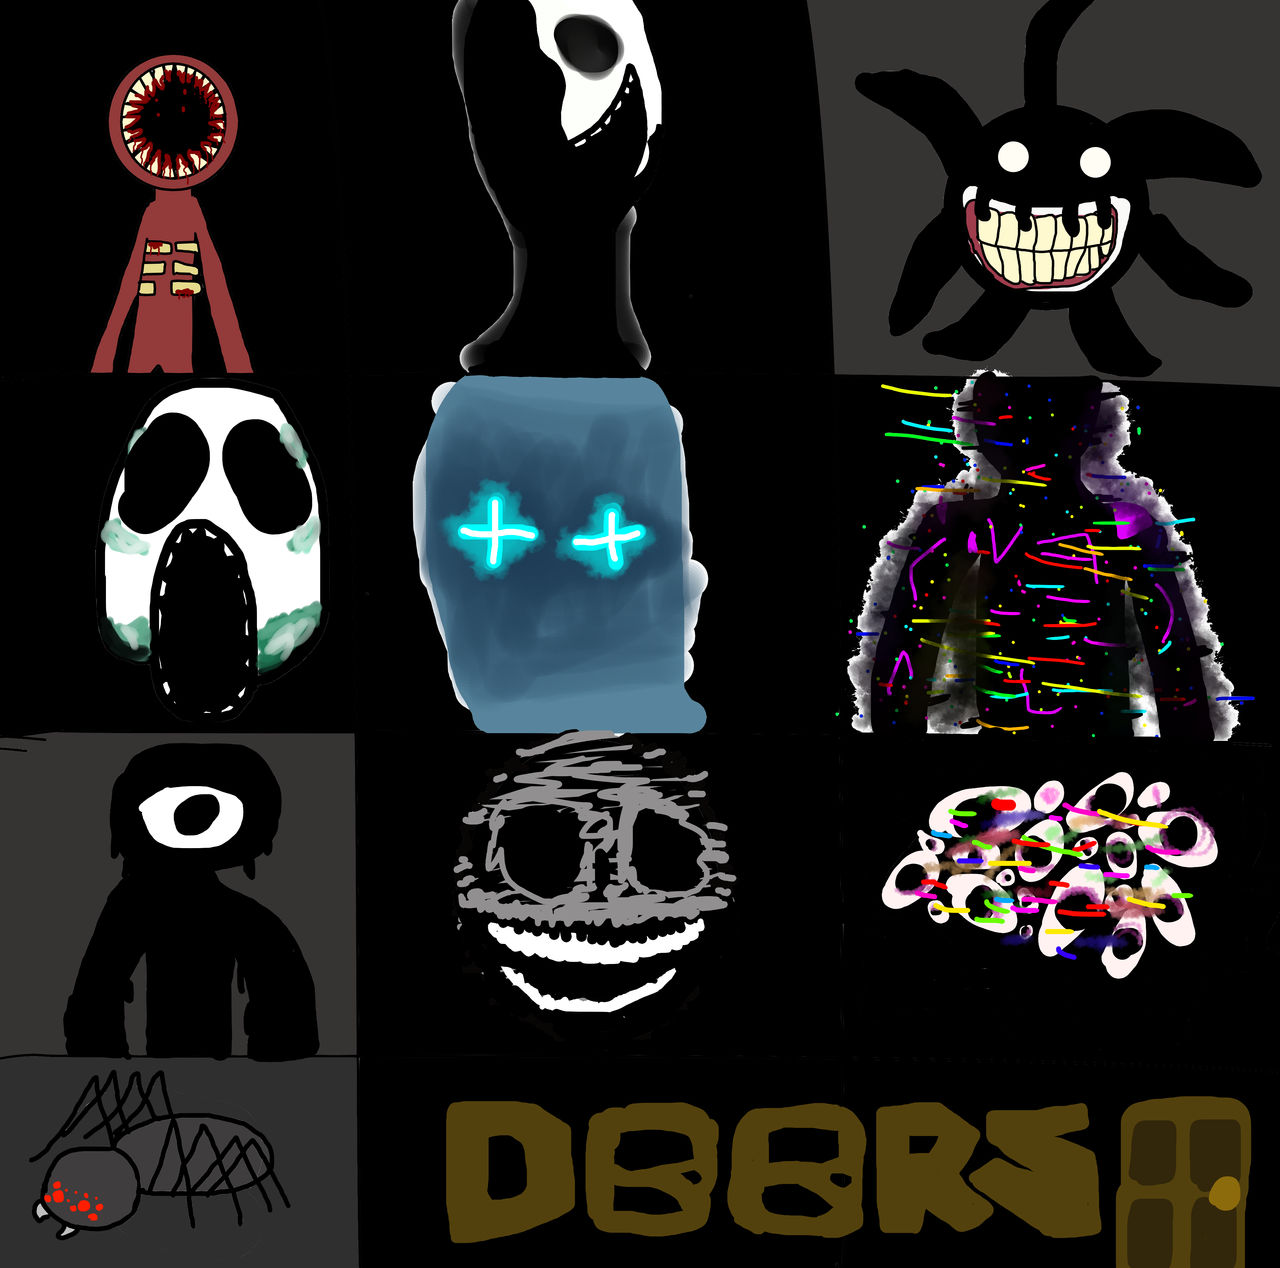 doors monsters in my style part 1 by BBQishere on DeviantArt